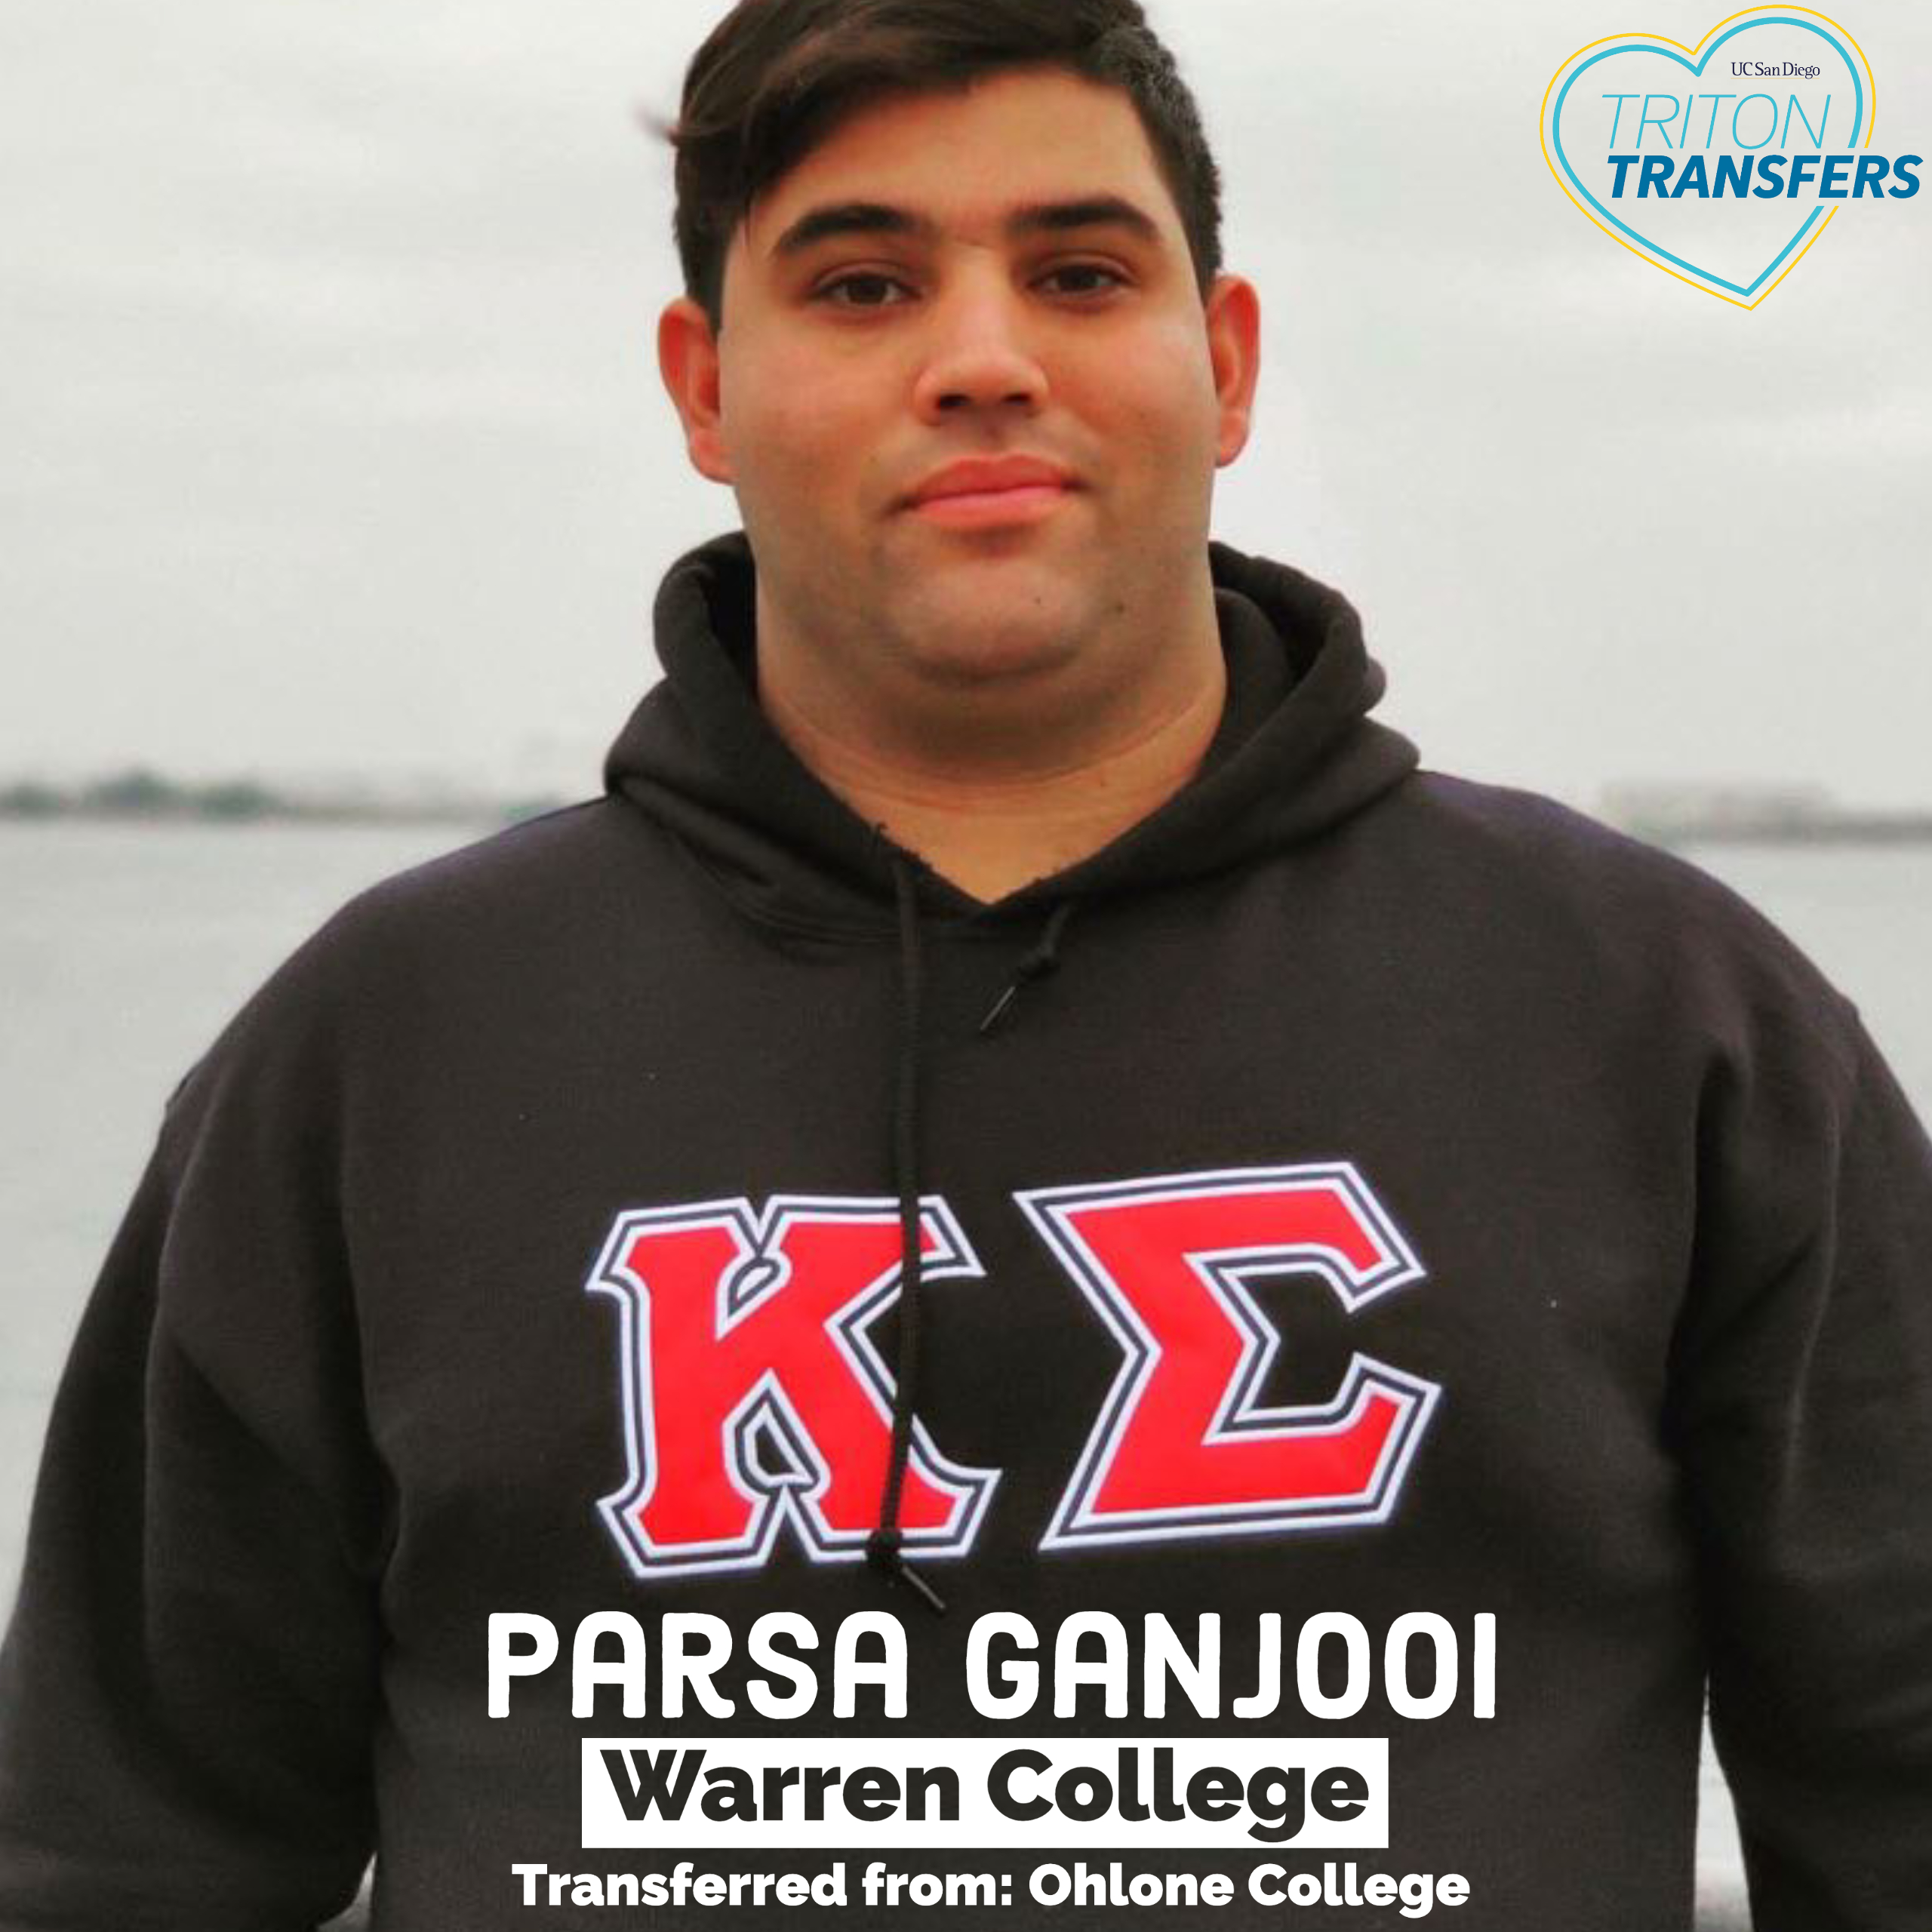 Parsa Ganjooi Warren College Transferred From: Ohlone College  Major: Math and Economics Involvement: Mens Club Water Polo, Kappa Sigma Fraternity Being a transfer student means….  Being a transfer student to me means I have less time to get adjusted to the UC system as a whole. My advice is to get involved as soon as possible!